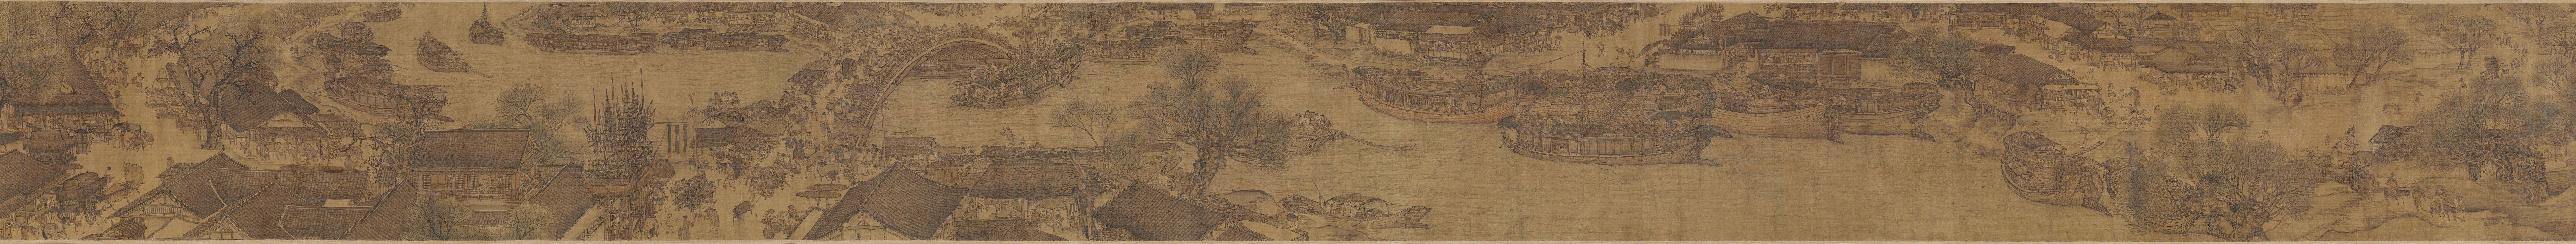 “Along the River During the Qingming Festival” by Zhang Zeduan